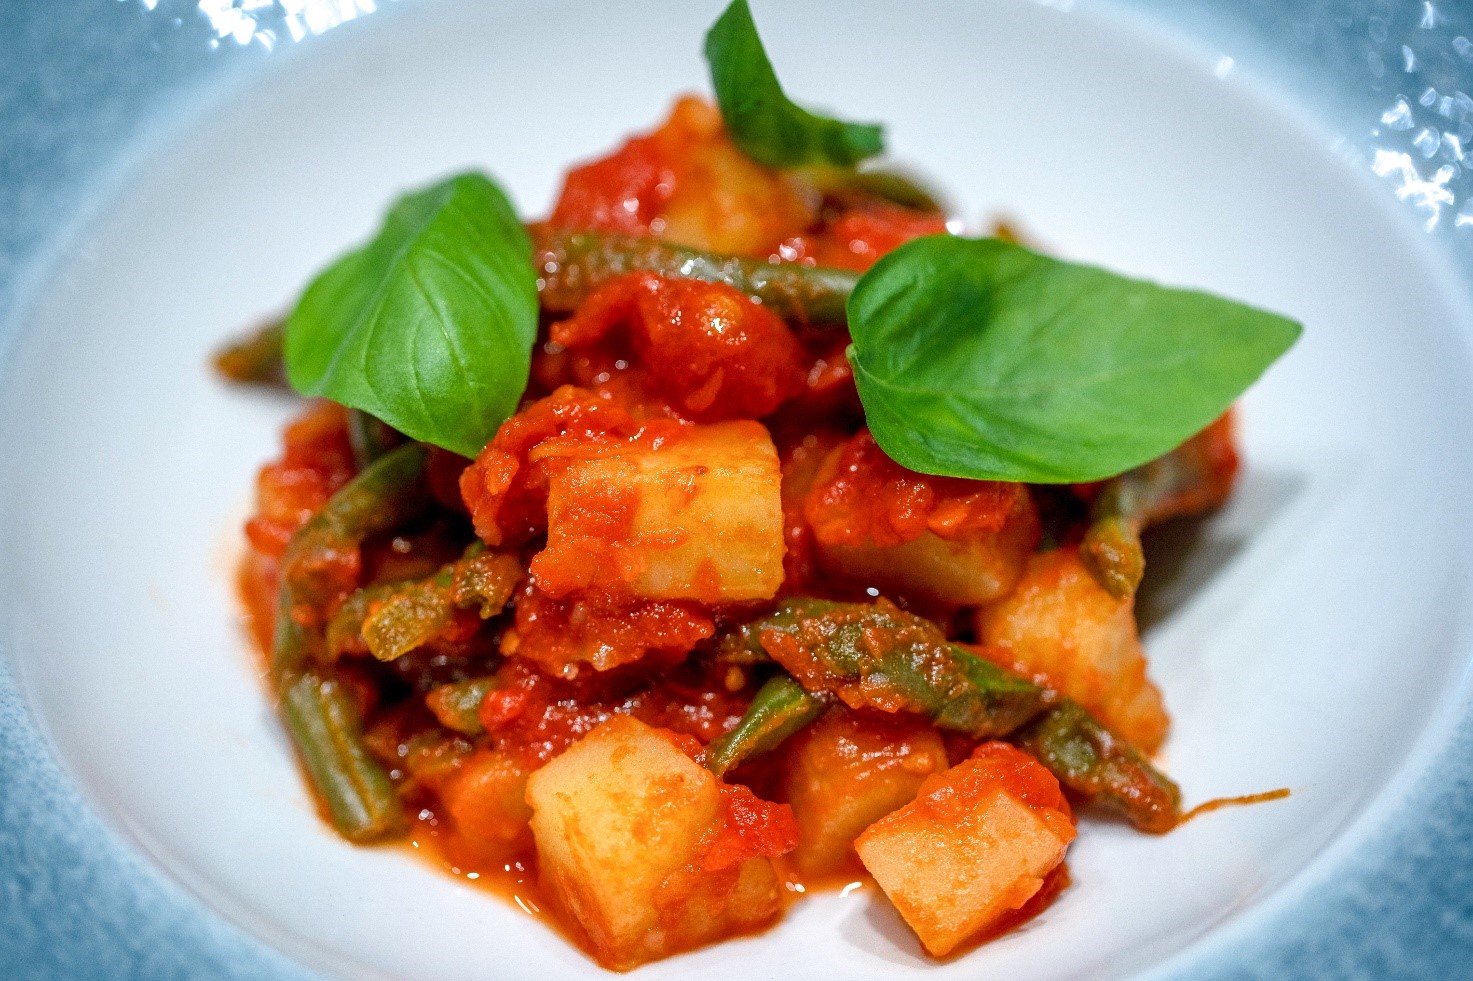 Green beans and potatoes in tomato sauce